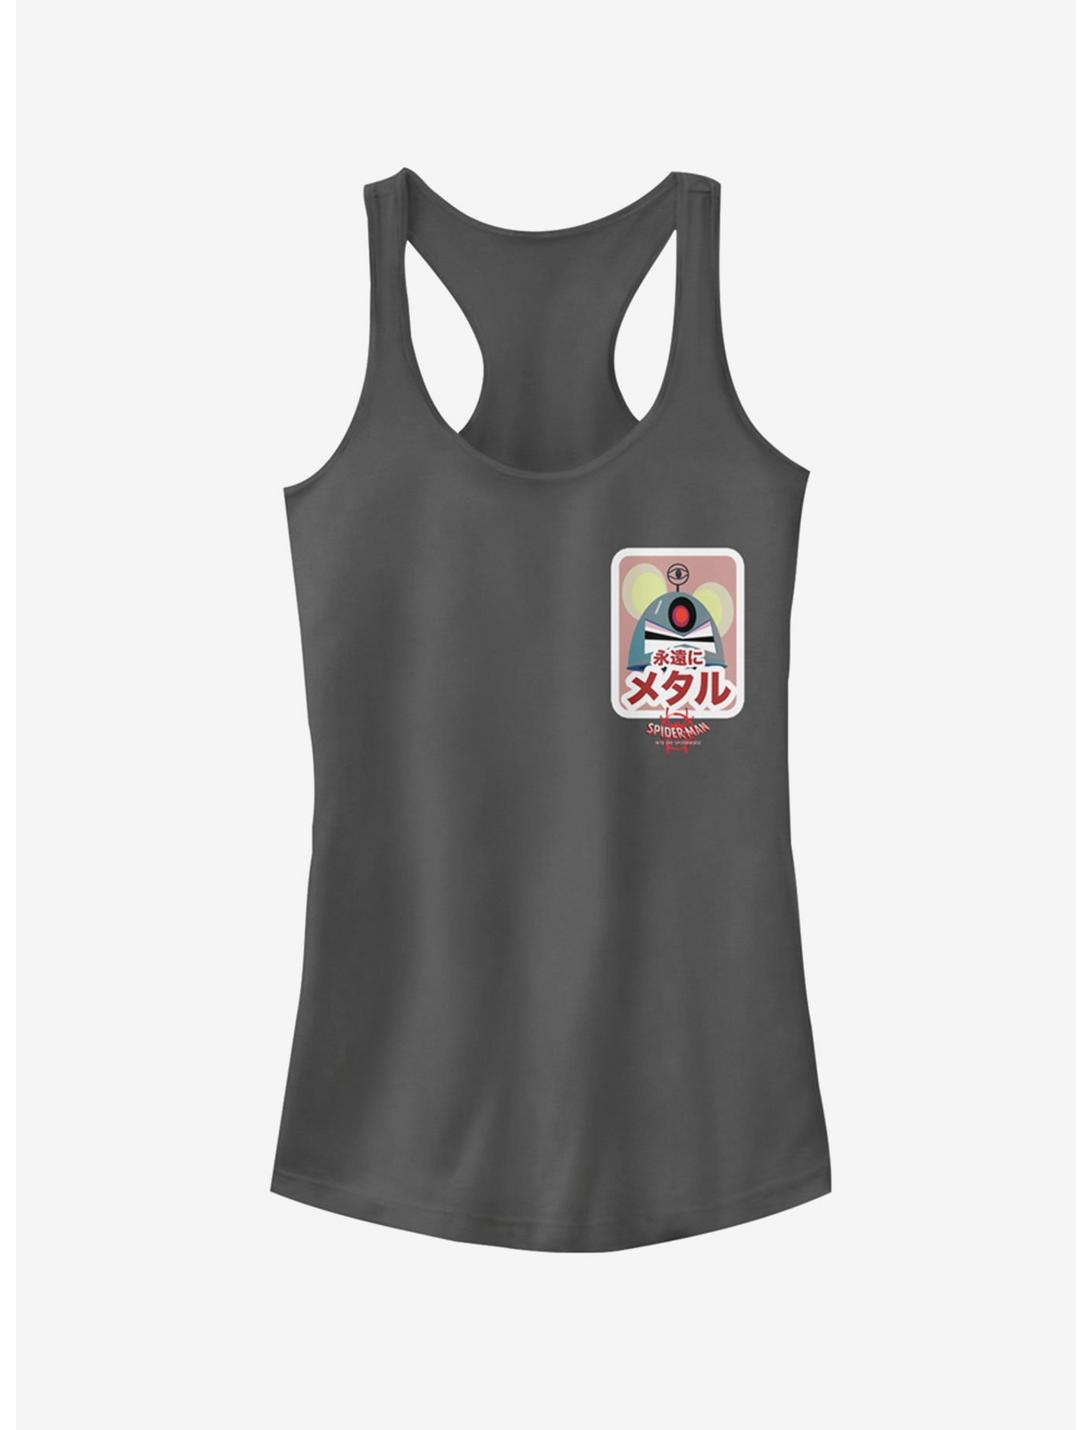 Marvel Spider-Man: Into The Spider-Verse Robot Mouse Sticker Pocket Girls Tank Top, CHARCOAL, hi-res